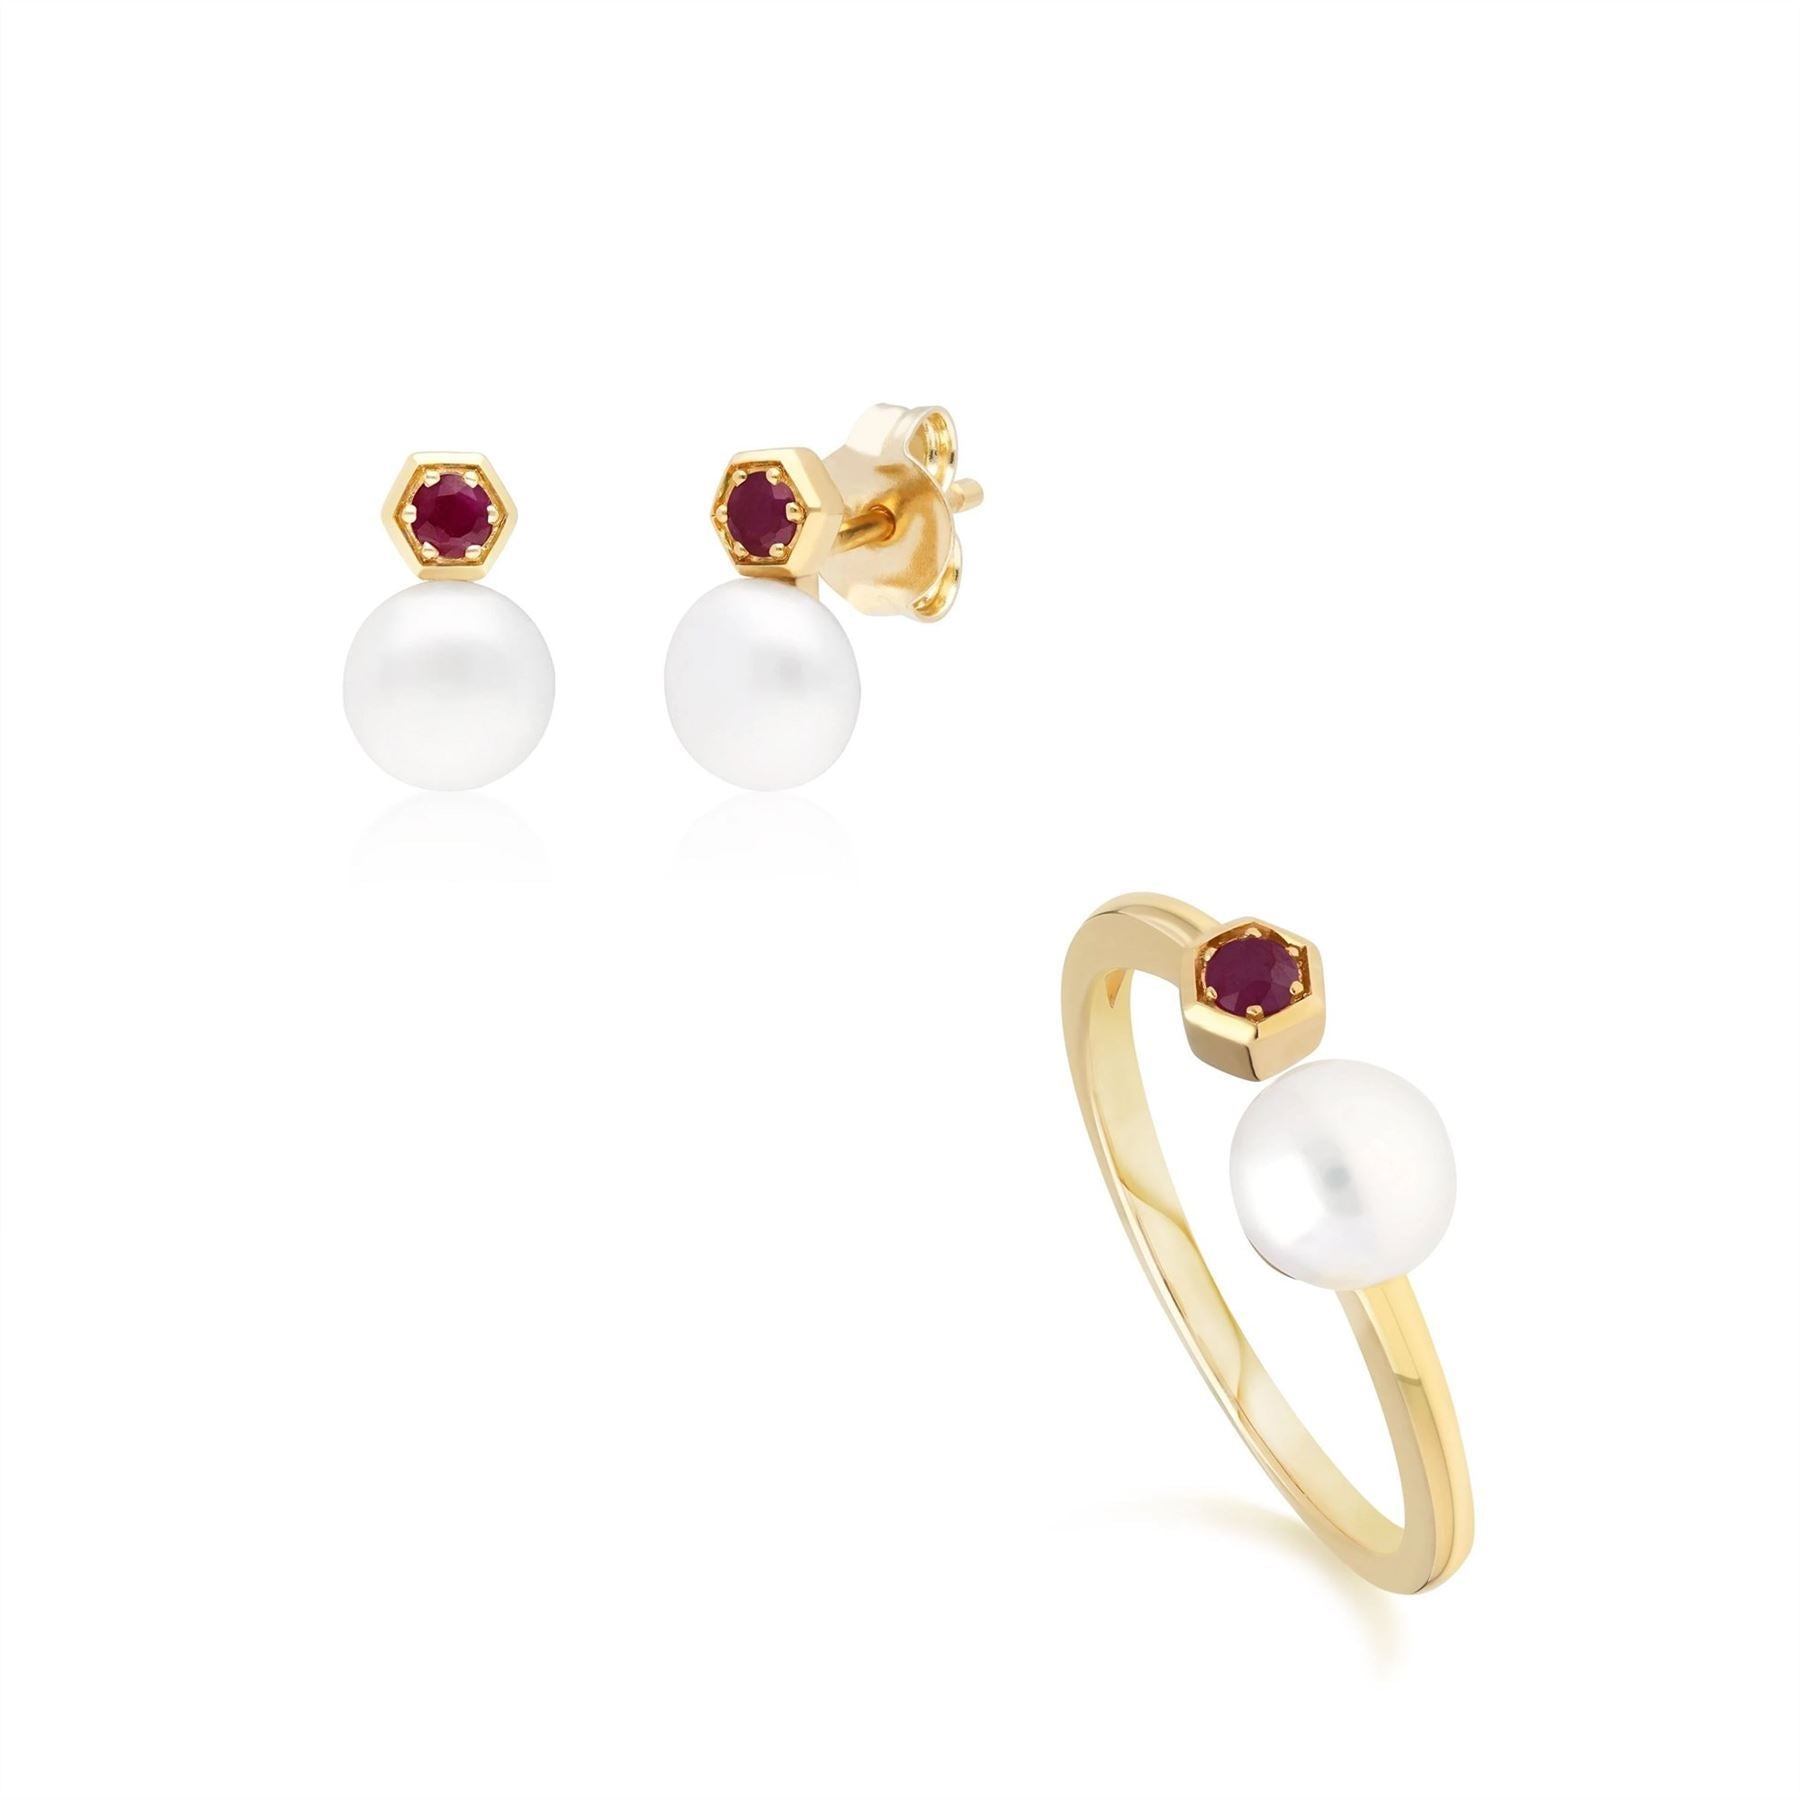 Modern Pearl & Ruby Earring & Ring Set in 9ct Yellow Gold